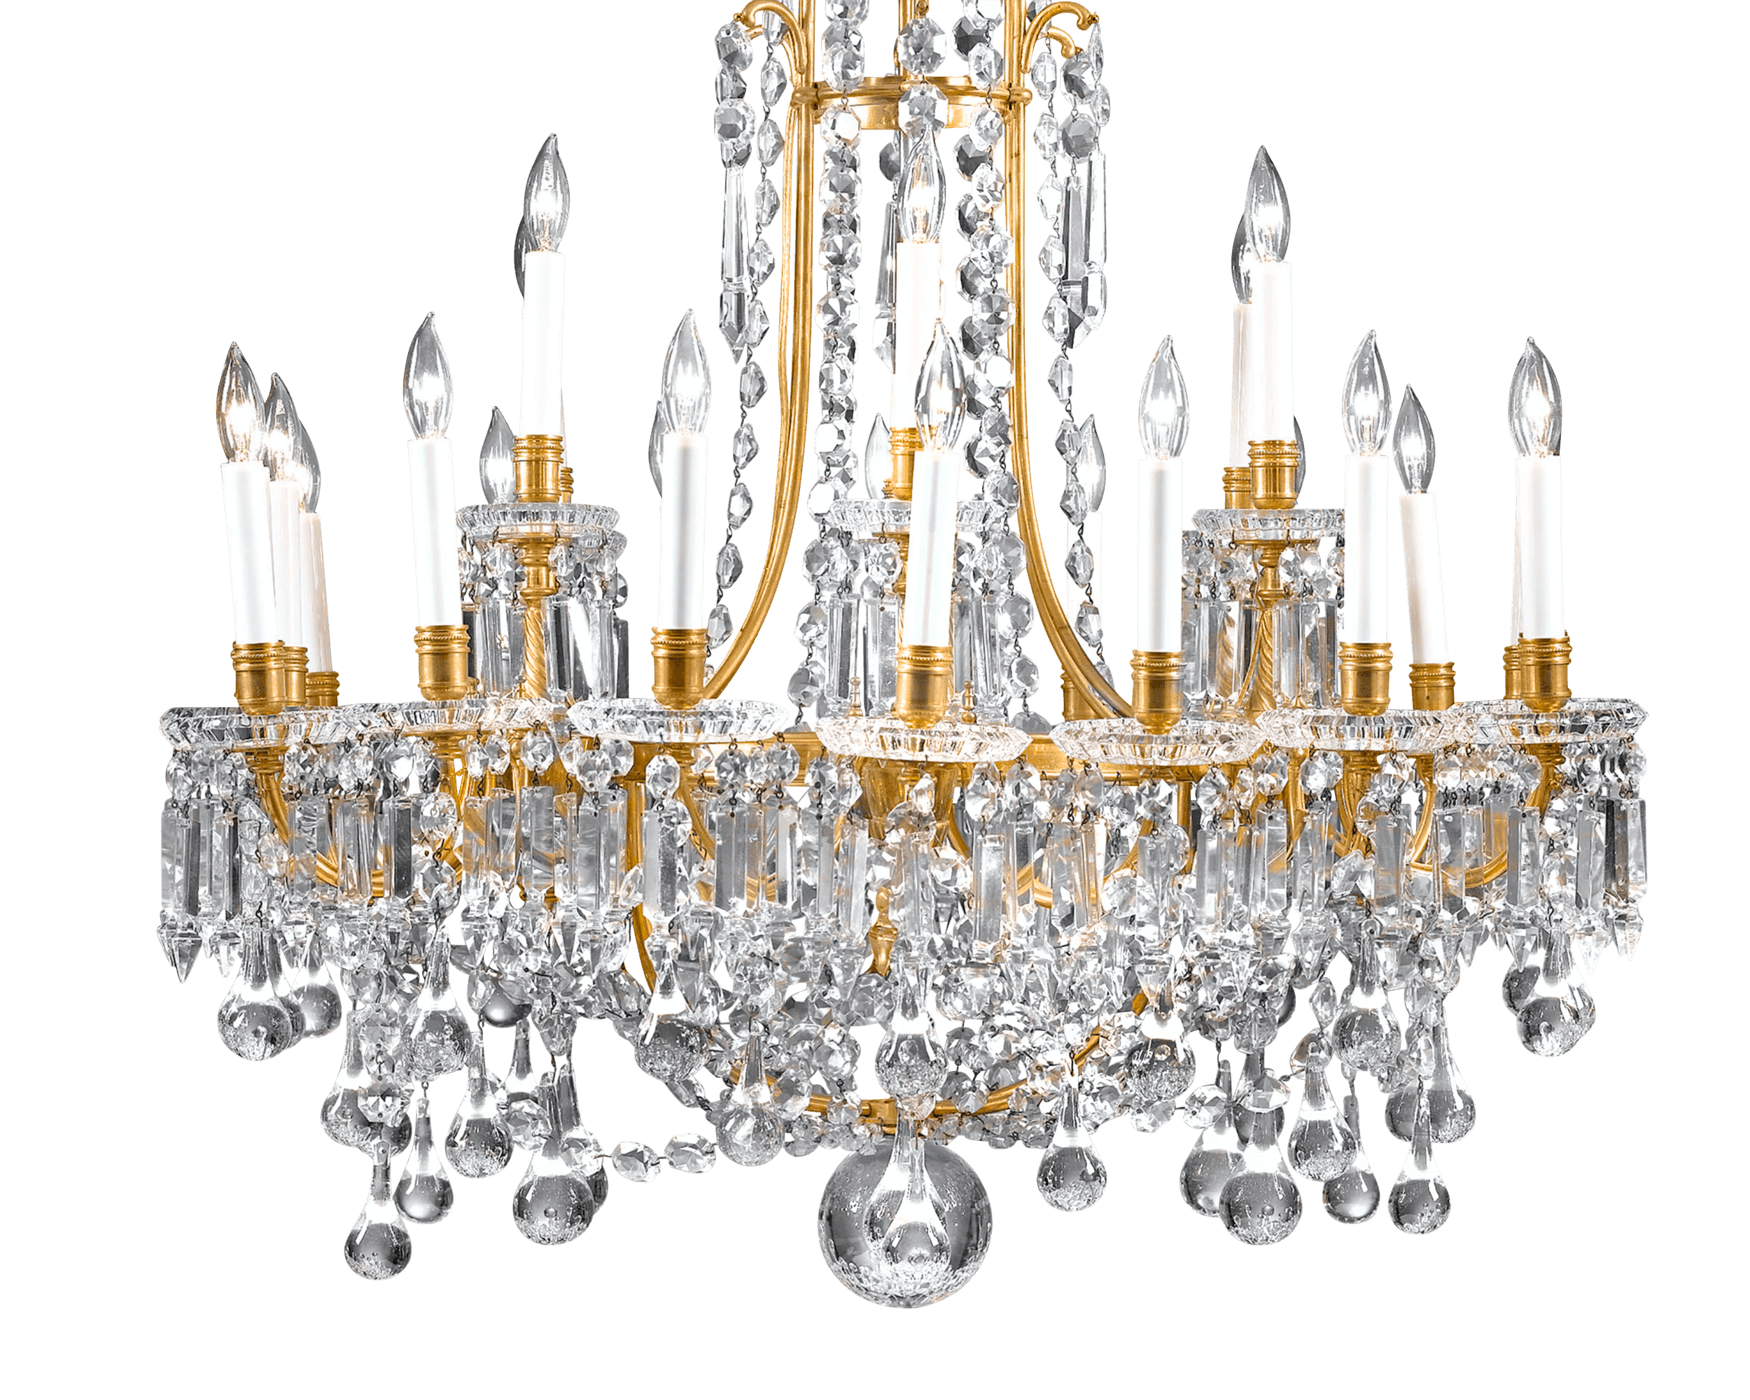 Chandelier Picture PNG Image High Quality PNG Image